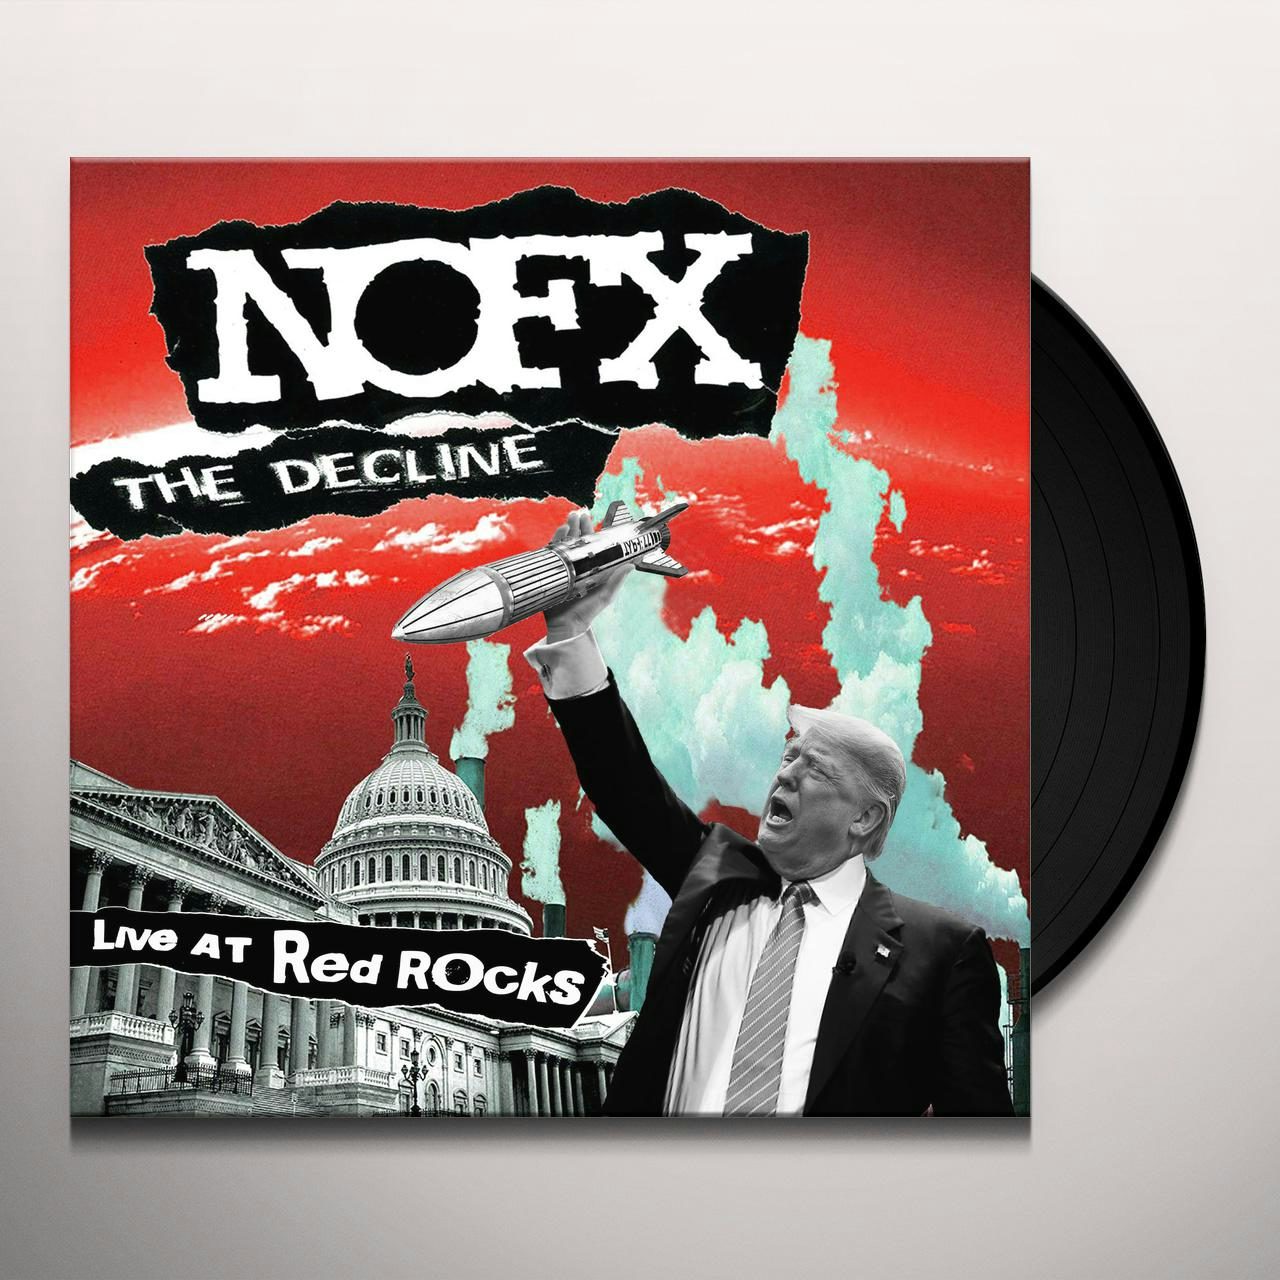 NOFX The Decline (Live At Red Rocks) Vinyl Record